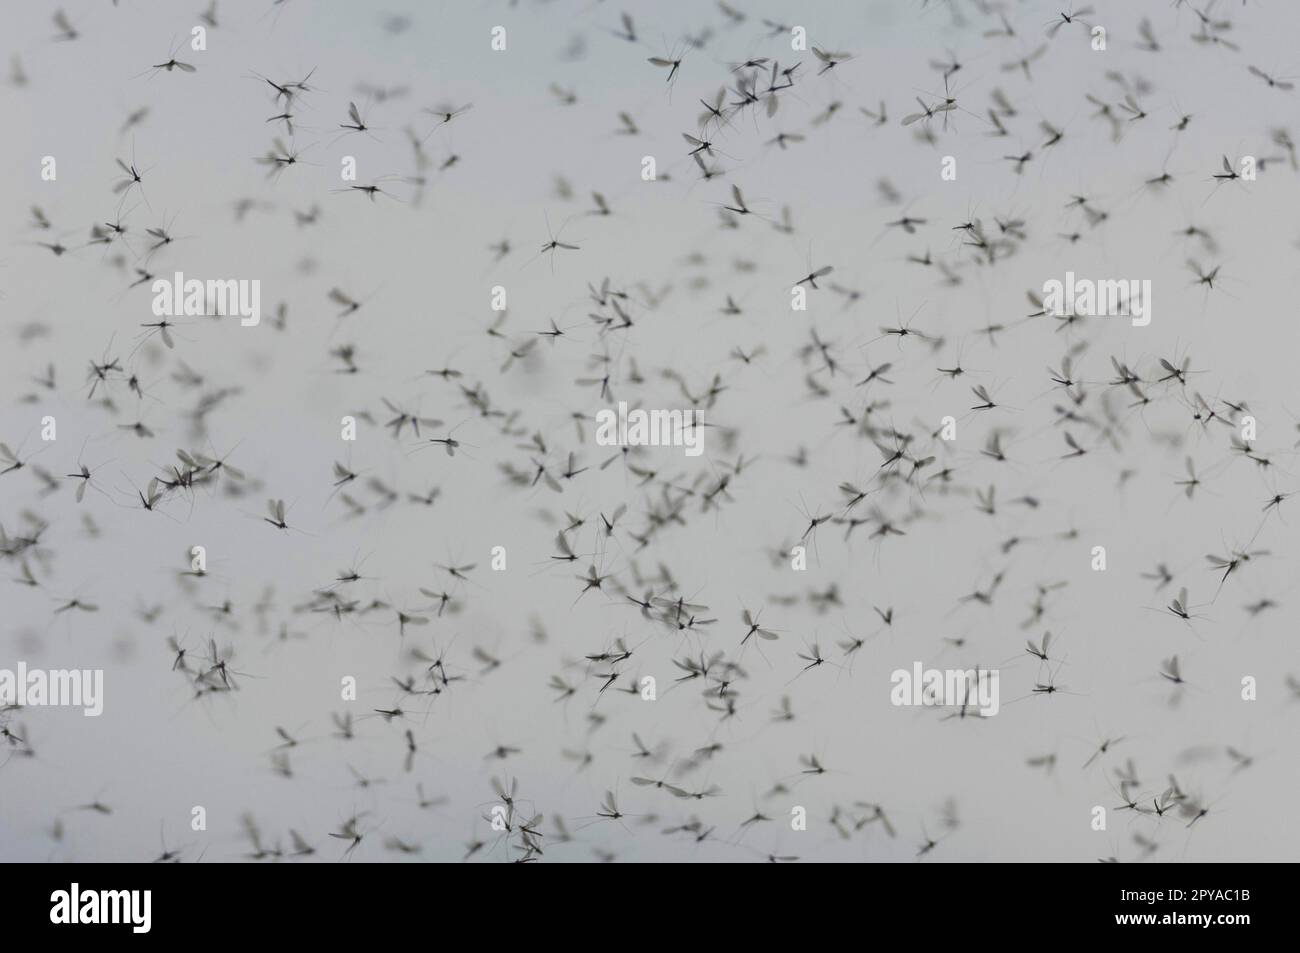 Twitching mosquitoes, swarm of mosquitoes Stock Photo